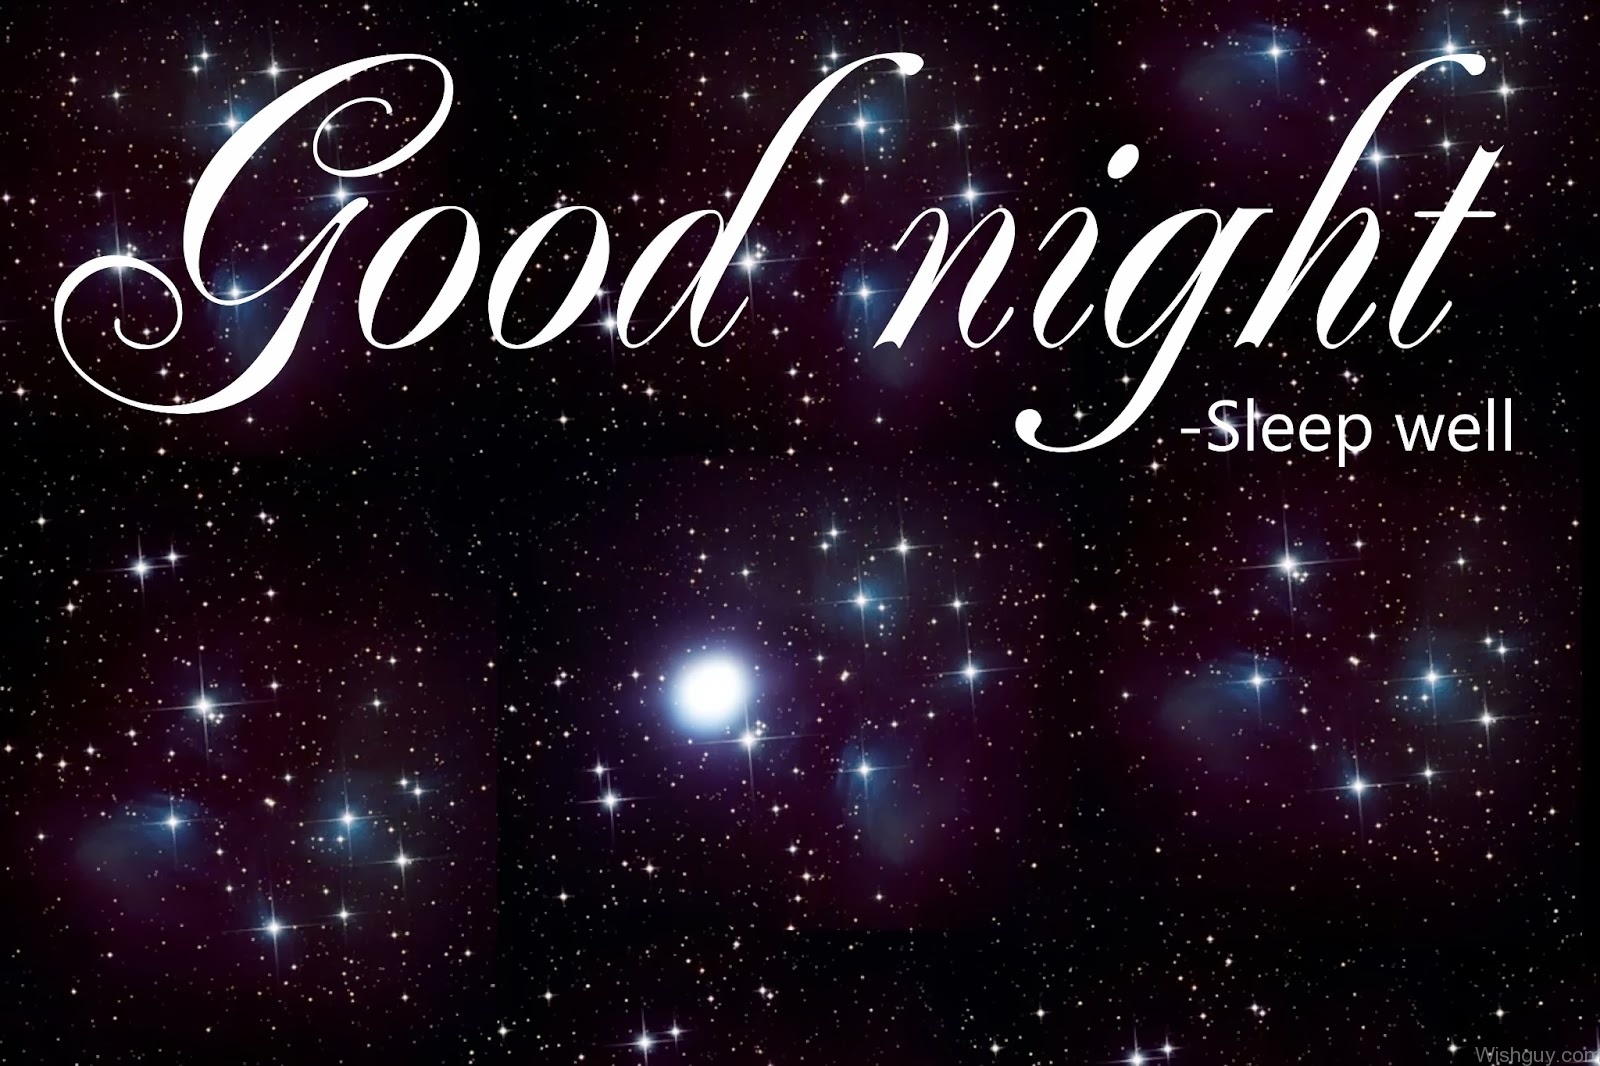 Good Night -Sleep Well - Wishes, Greetings, Pictures – Wish Guy